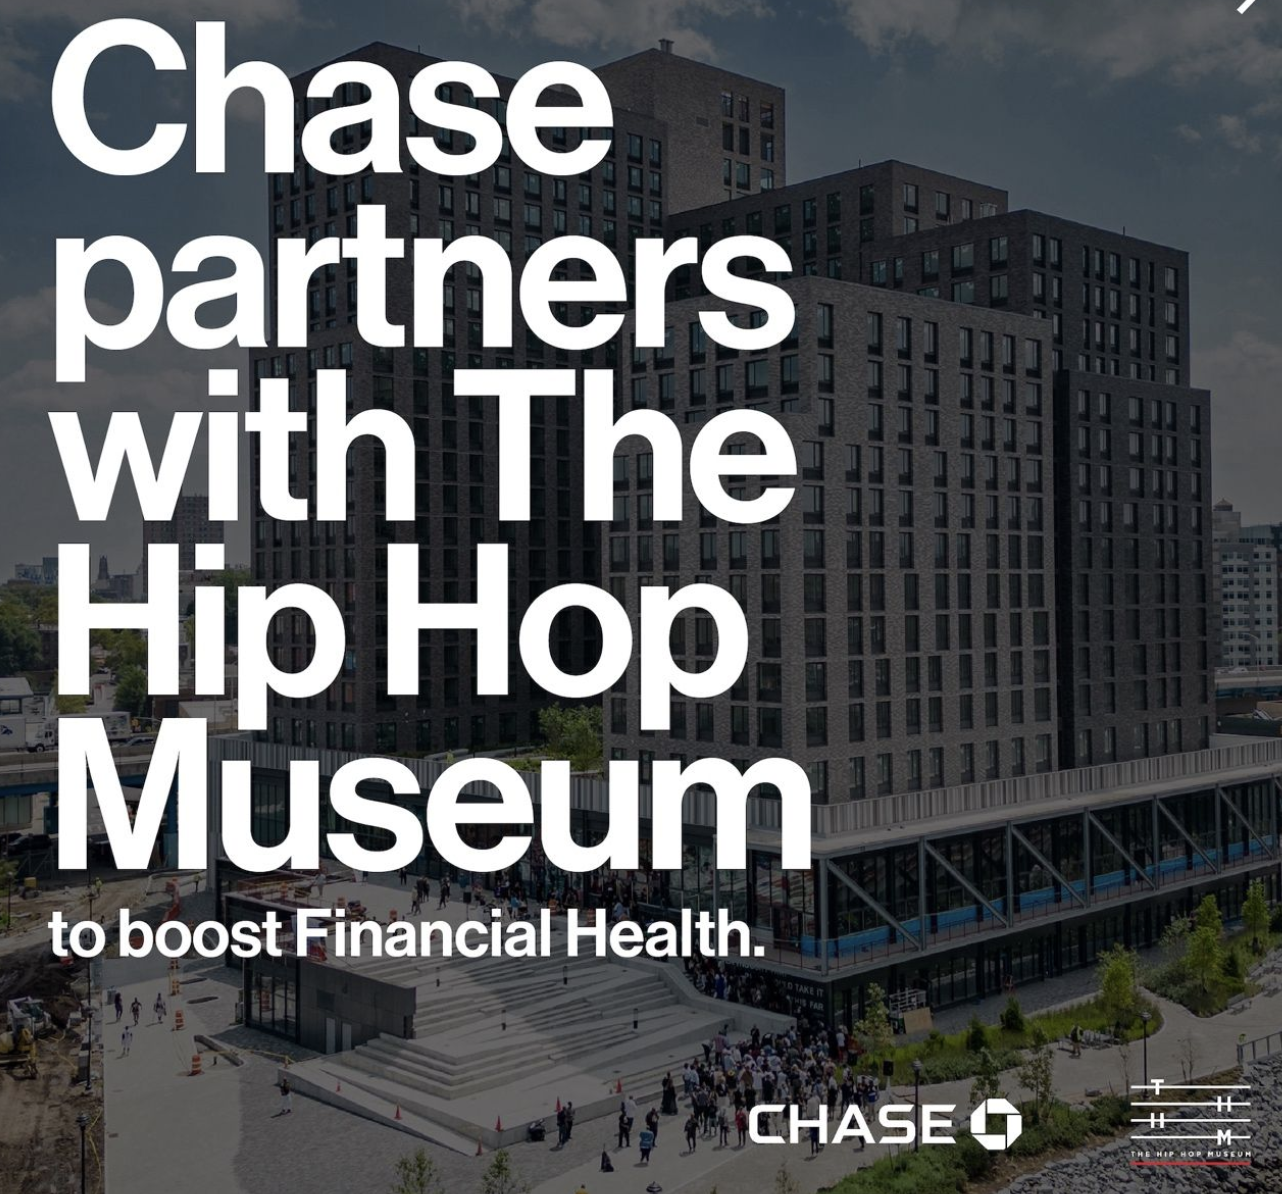 Chase partners with The Hip Hop Museum to boost Financial Health nationwide